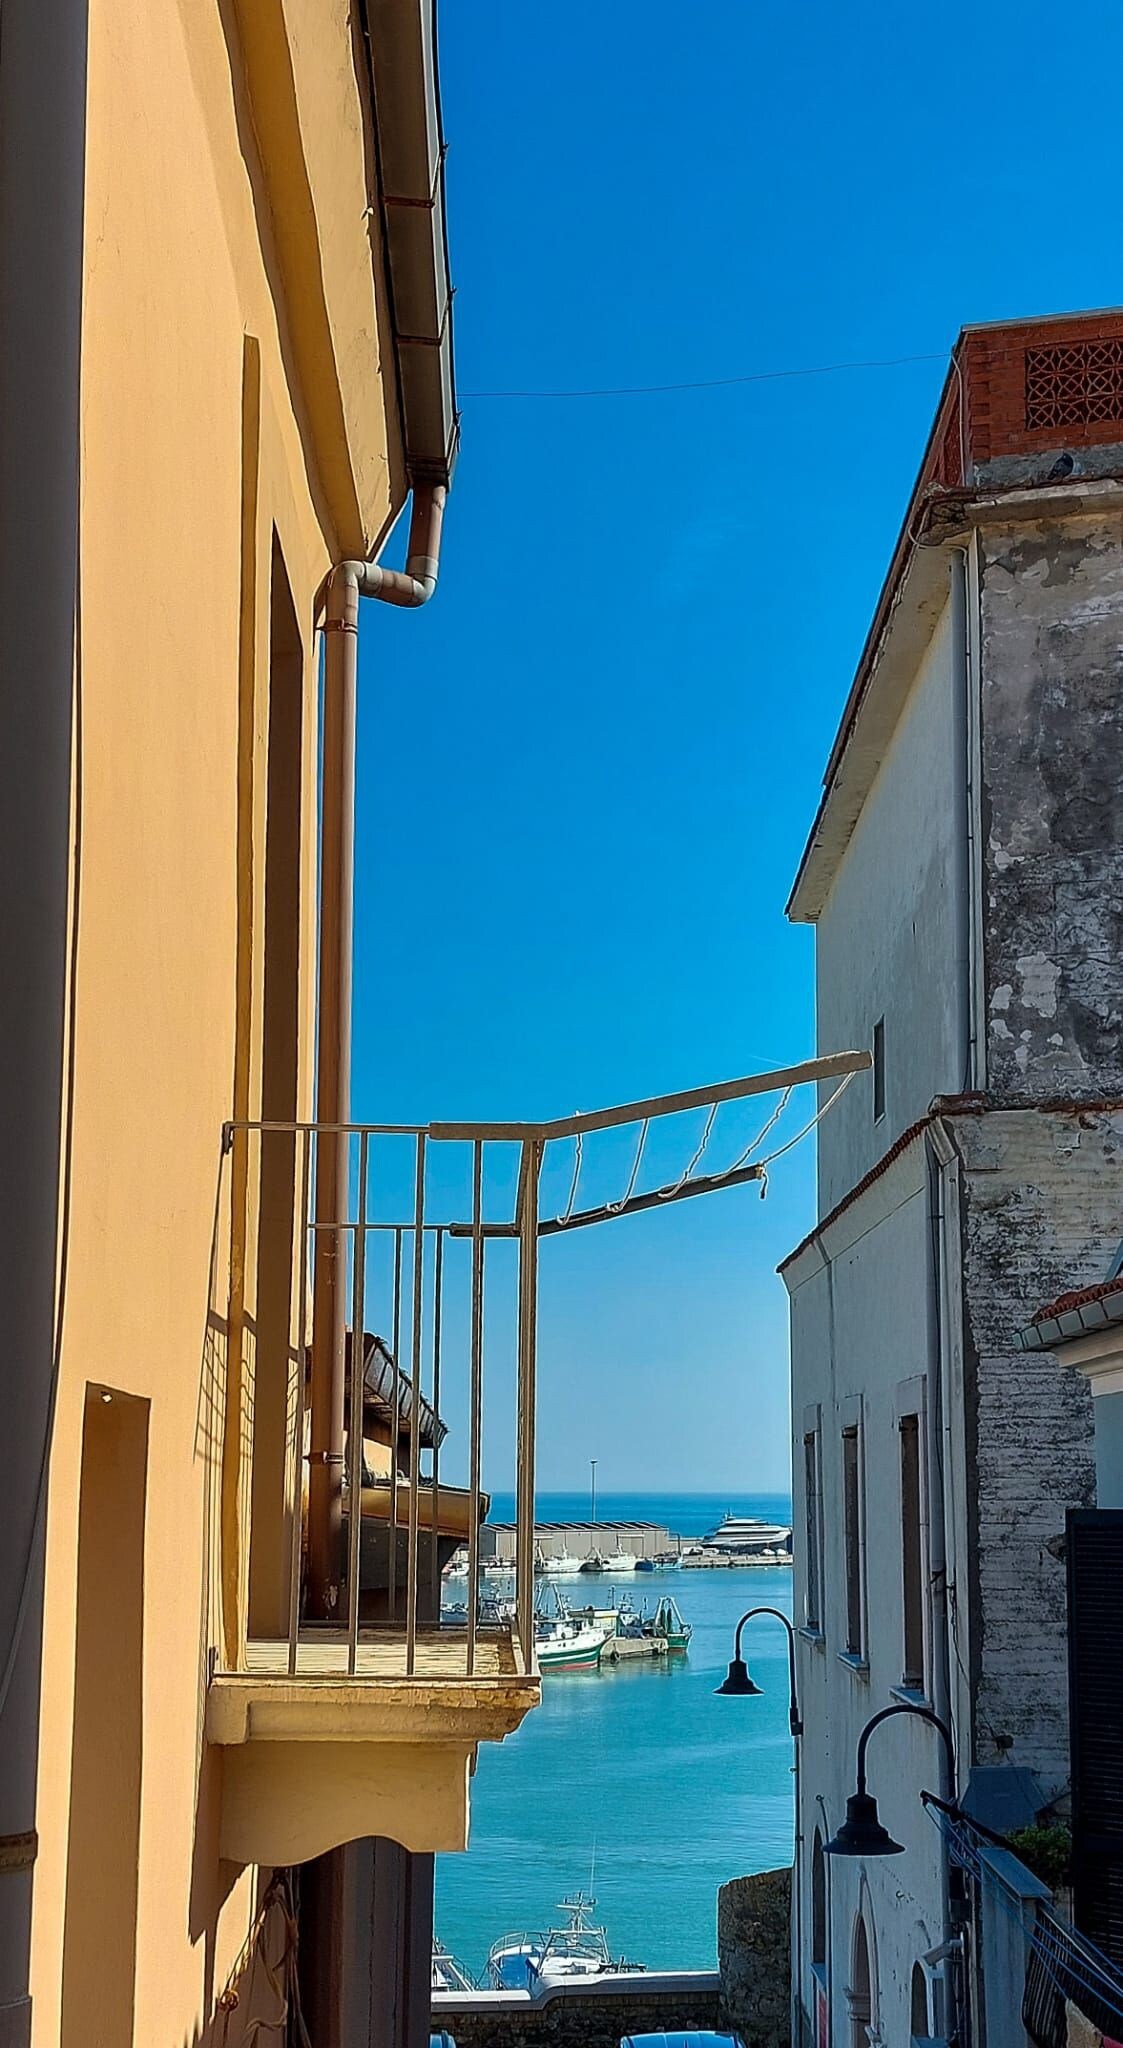 3 bedroom flat in the heart of Termoli old town